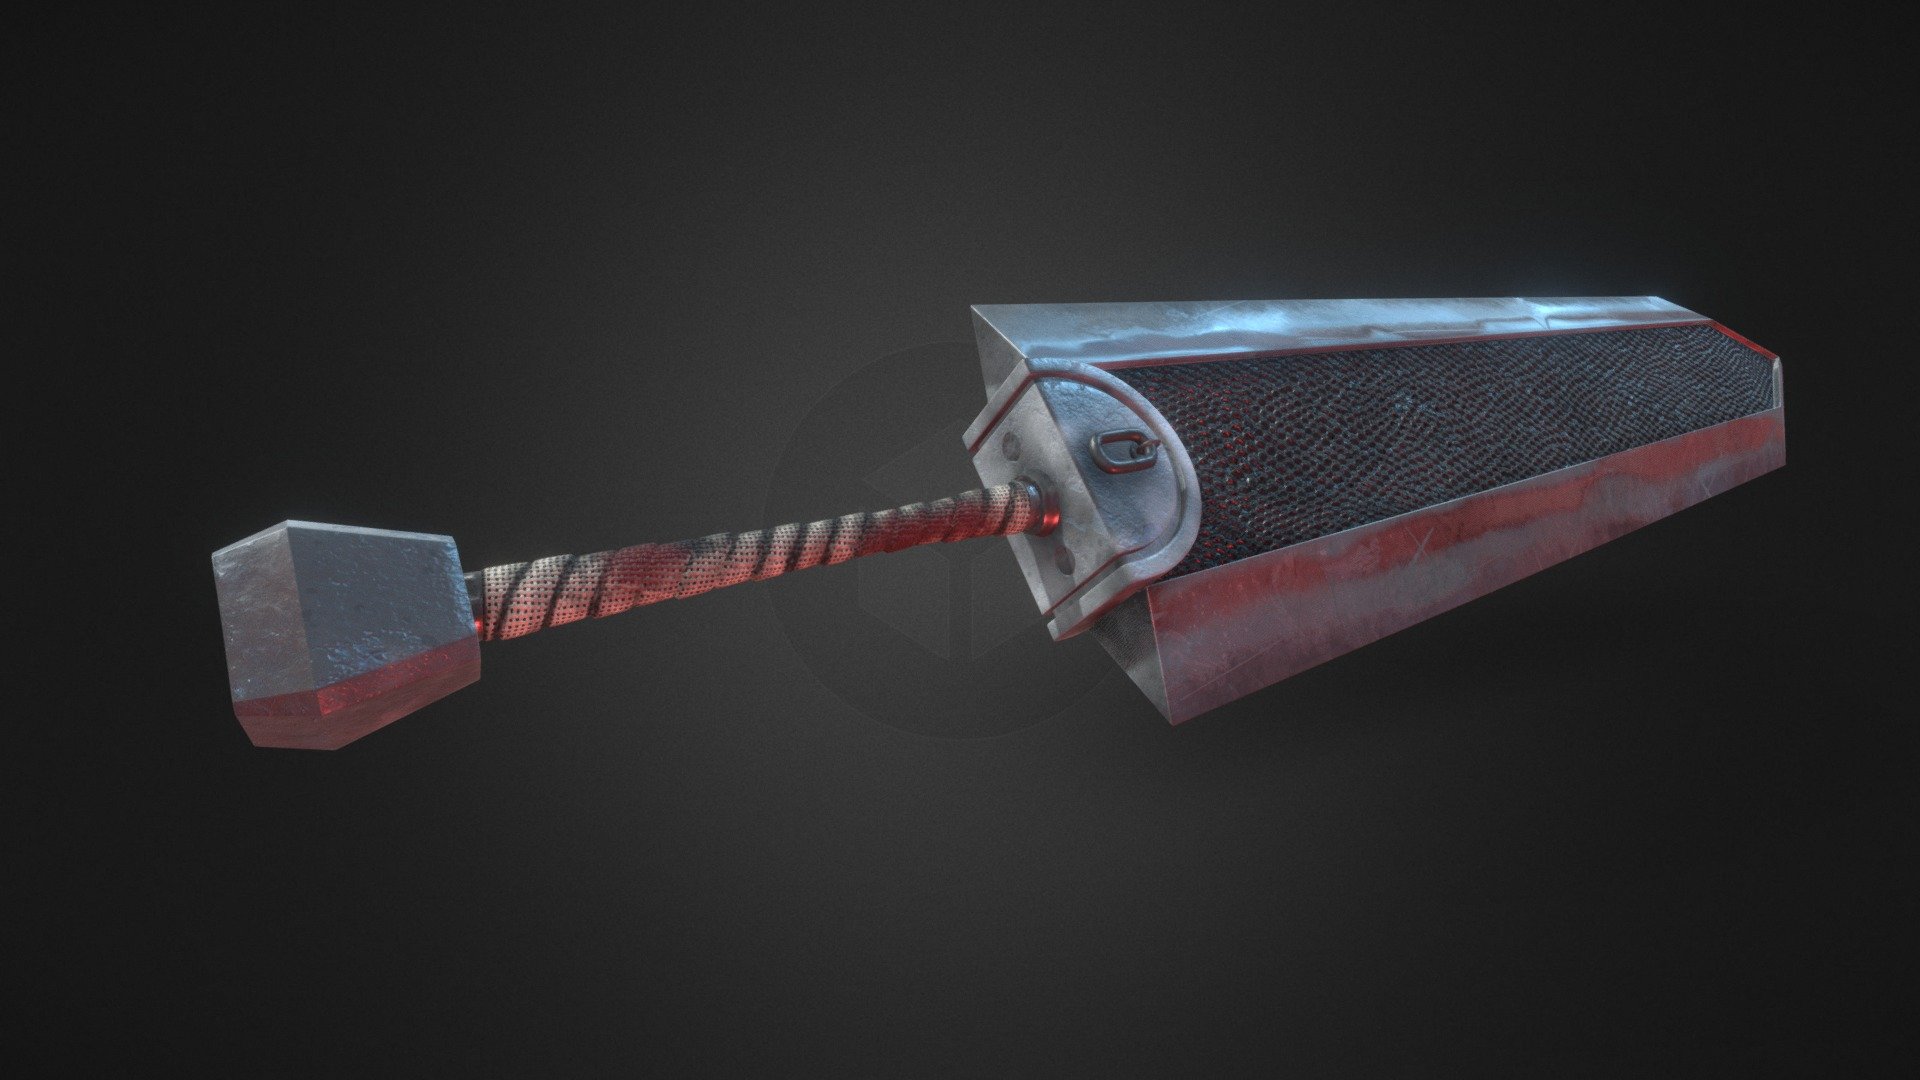 It was too big to be called a sword. Massive, thick, heavy, and far too rough. Indeed, it was a heap of raw iron.
– Description of the Dragon Slayer




3D Model: 3DSmax



Textures: Substance Painter



Head Image: Marmoset



Social Media

Linkedin: https://es.linkedin.com/in/daniel-molinero-lucas-70a90a173
Instagram: https://www.instagram.com/cglimbo
Artstation: https://www.artstation.com/papishushi
Web: https://www.danielmolinerolucas.net
Mail: danielmolinero111@cyberdude.com

This work was made by me Daniel Molinero Lucas (Papishushi) - Dragon Slayer from Berserk - Download Free 3D model by papishushi 3d model